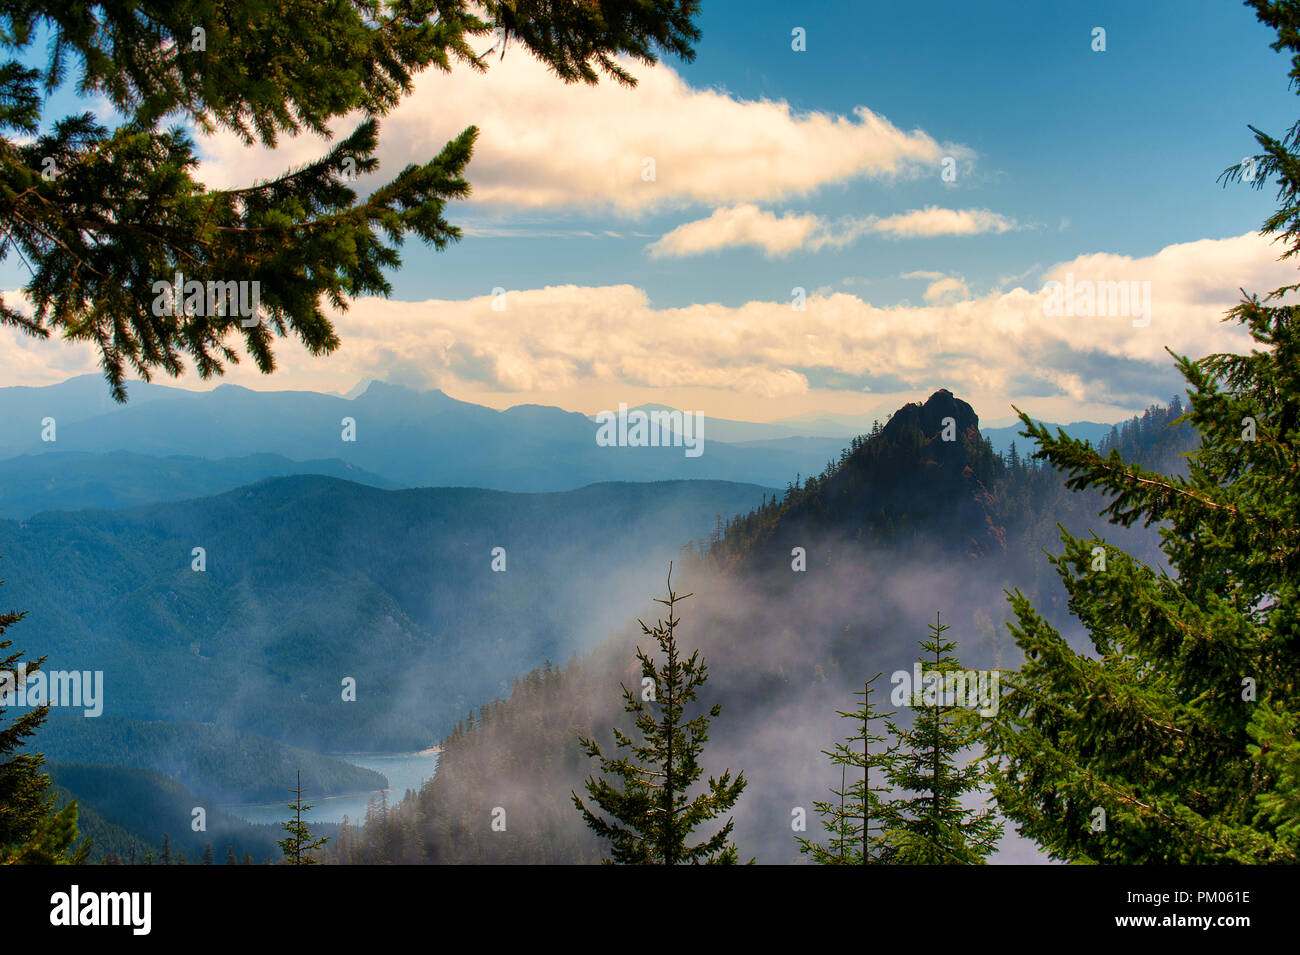 Landscape view of the Detroit Lake area while hiking in the Oregon Cascade Mountain Range. Stock Photo